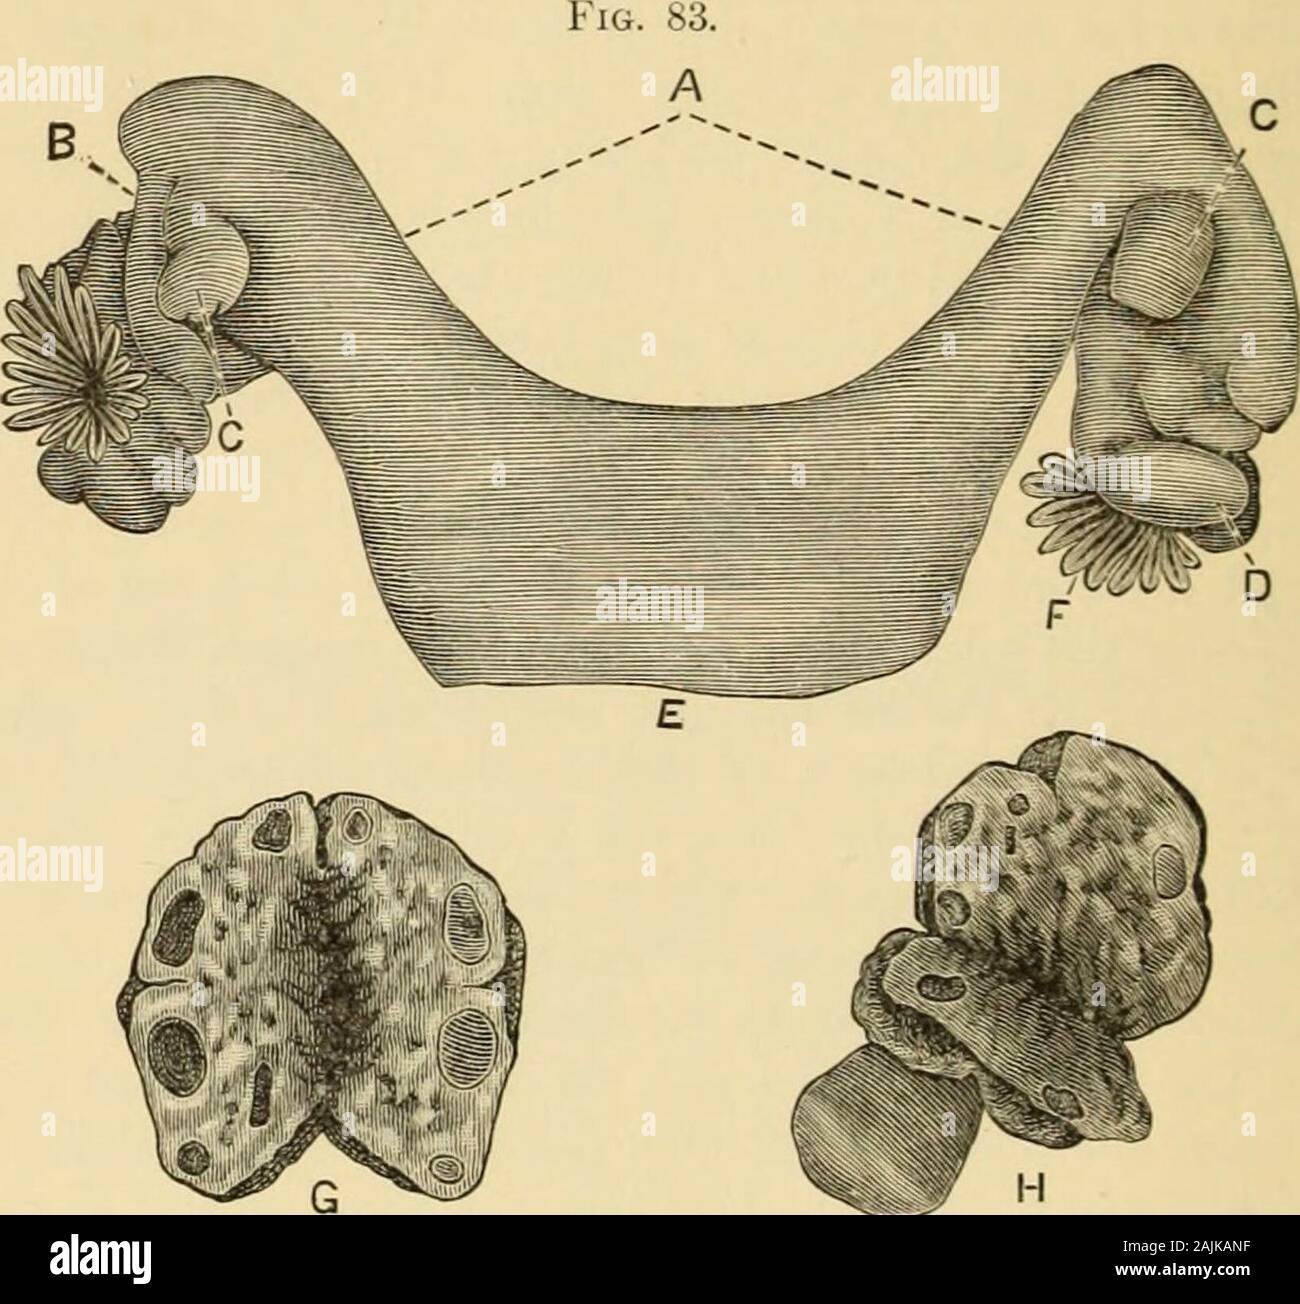 A system of gynecology . e. didelphys), uterus bicornis, and uterus globularis i.e. septus). Uterus bipartitus Mayer, Kussmaul) is by others designated as uterus bifidus. On the other hand, the term bifid is by Playfair [Sciena and Practice of Midwifery, London, 1876, vol. i. p. 13) osed as a synonym of double, and applied to a uterus bicornis unicoUis. Tlie term double uterus is used in very different senses, ami dues not designate anyparticular kind of malformation. It ought only to he used as a general term, eompris-ing the uterus didelphys, the u£ duplex, and the uterus septus. I m. Gyn. T Stock Photo